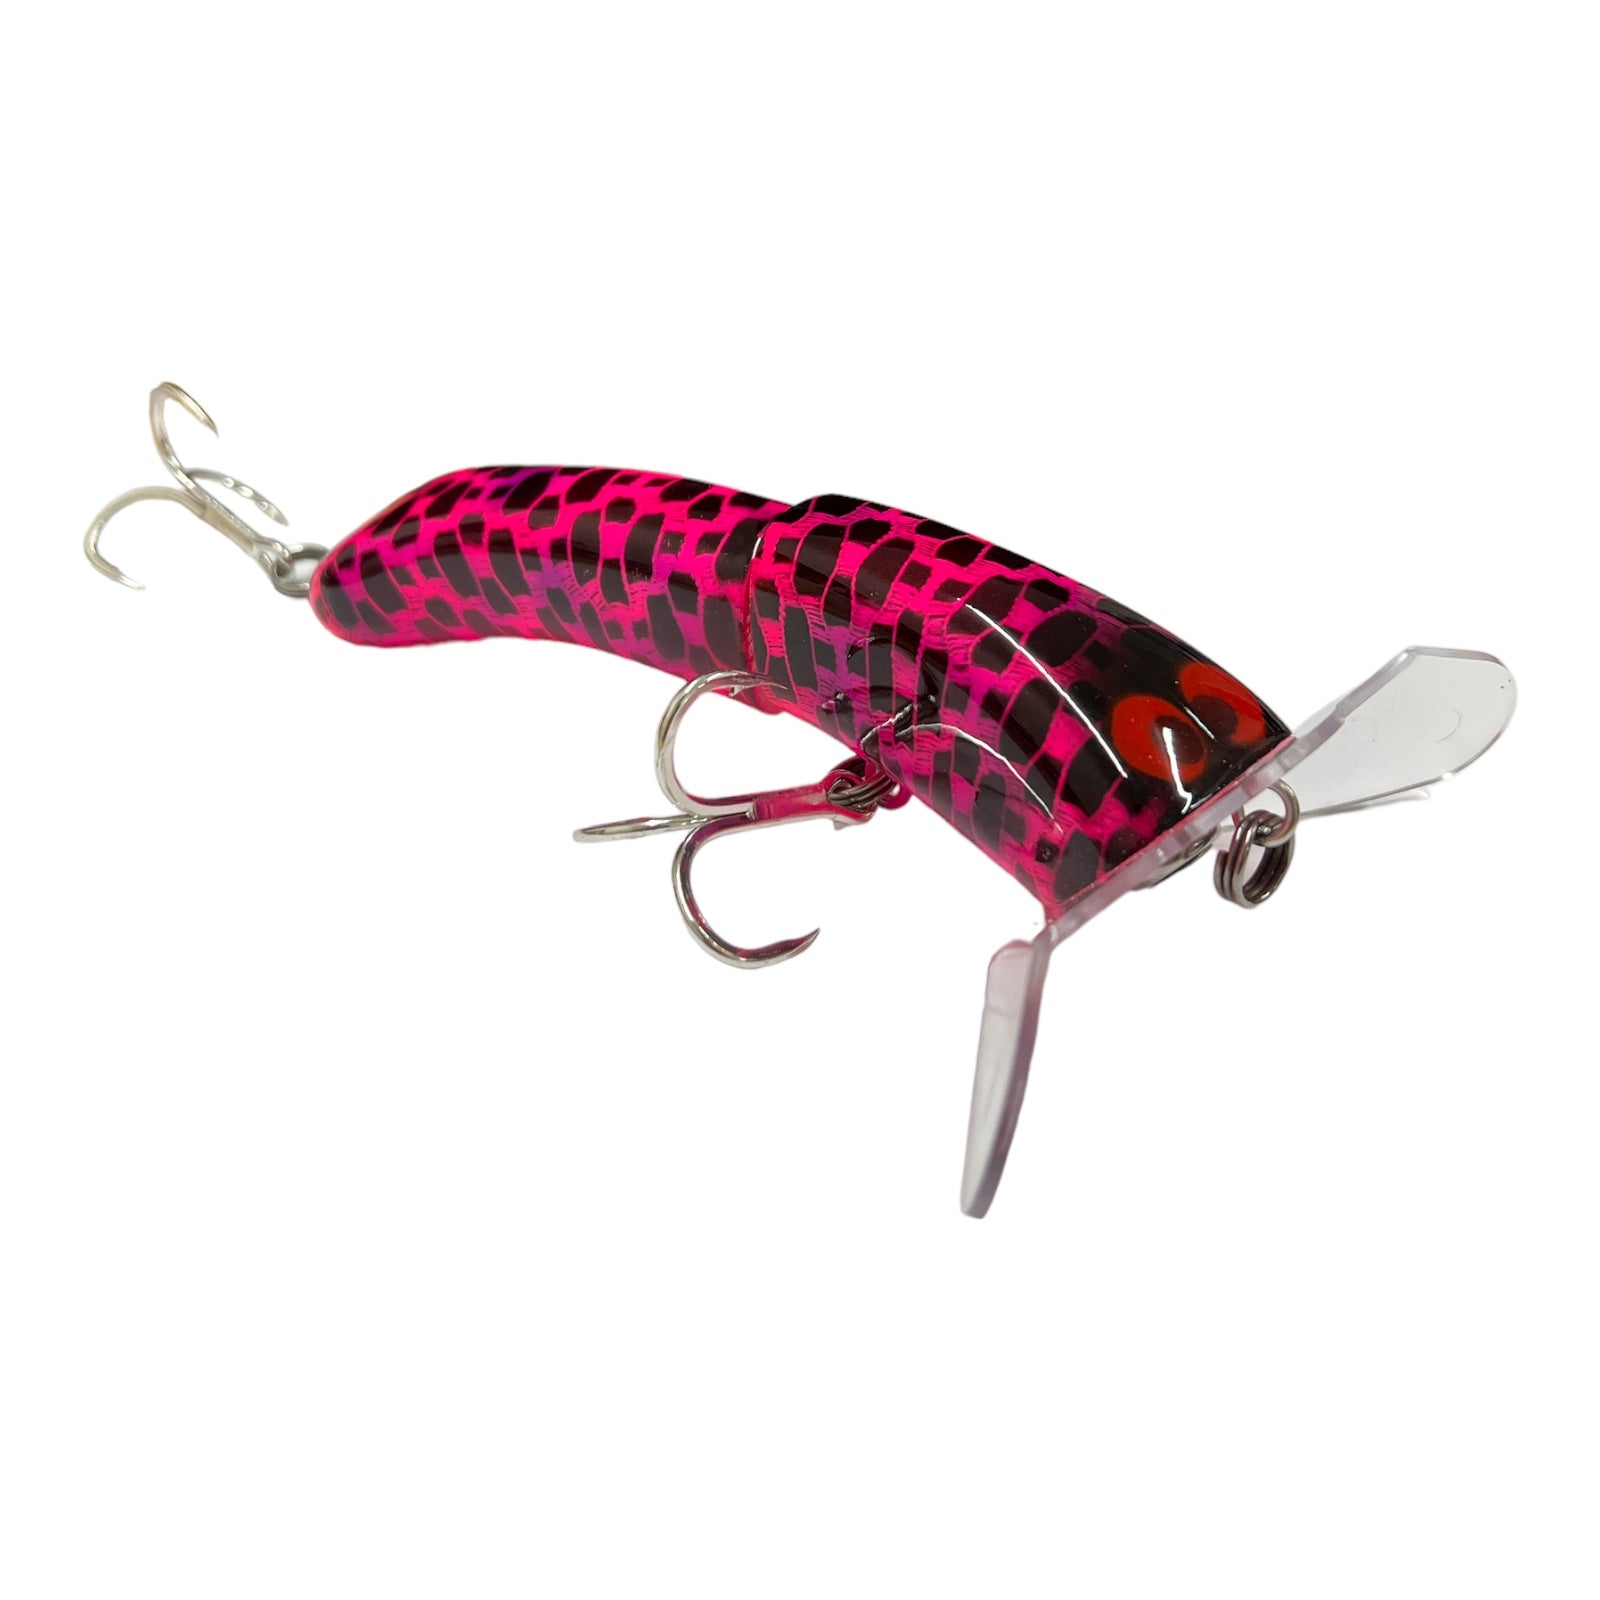 CODDOG SURFACE LURES – Tamworth Fishing Tackle and the Great Outdoors